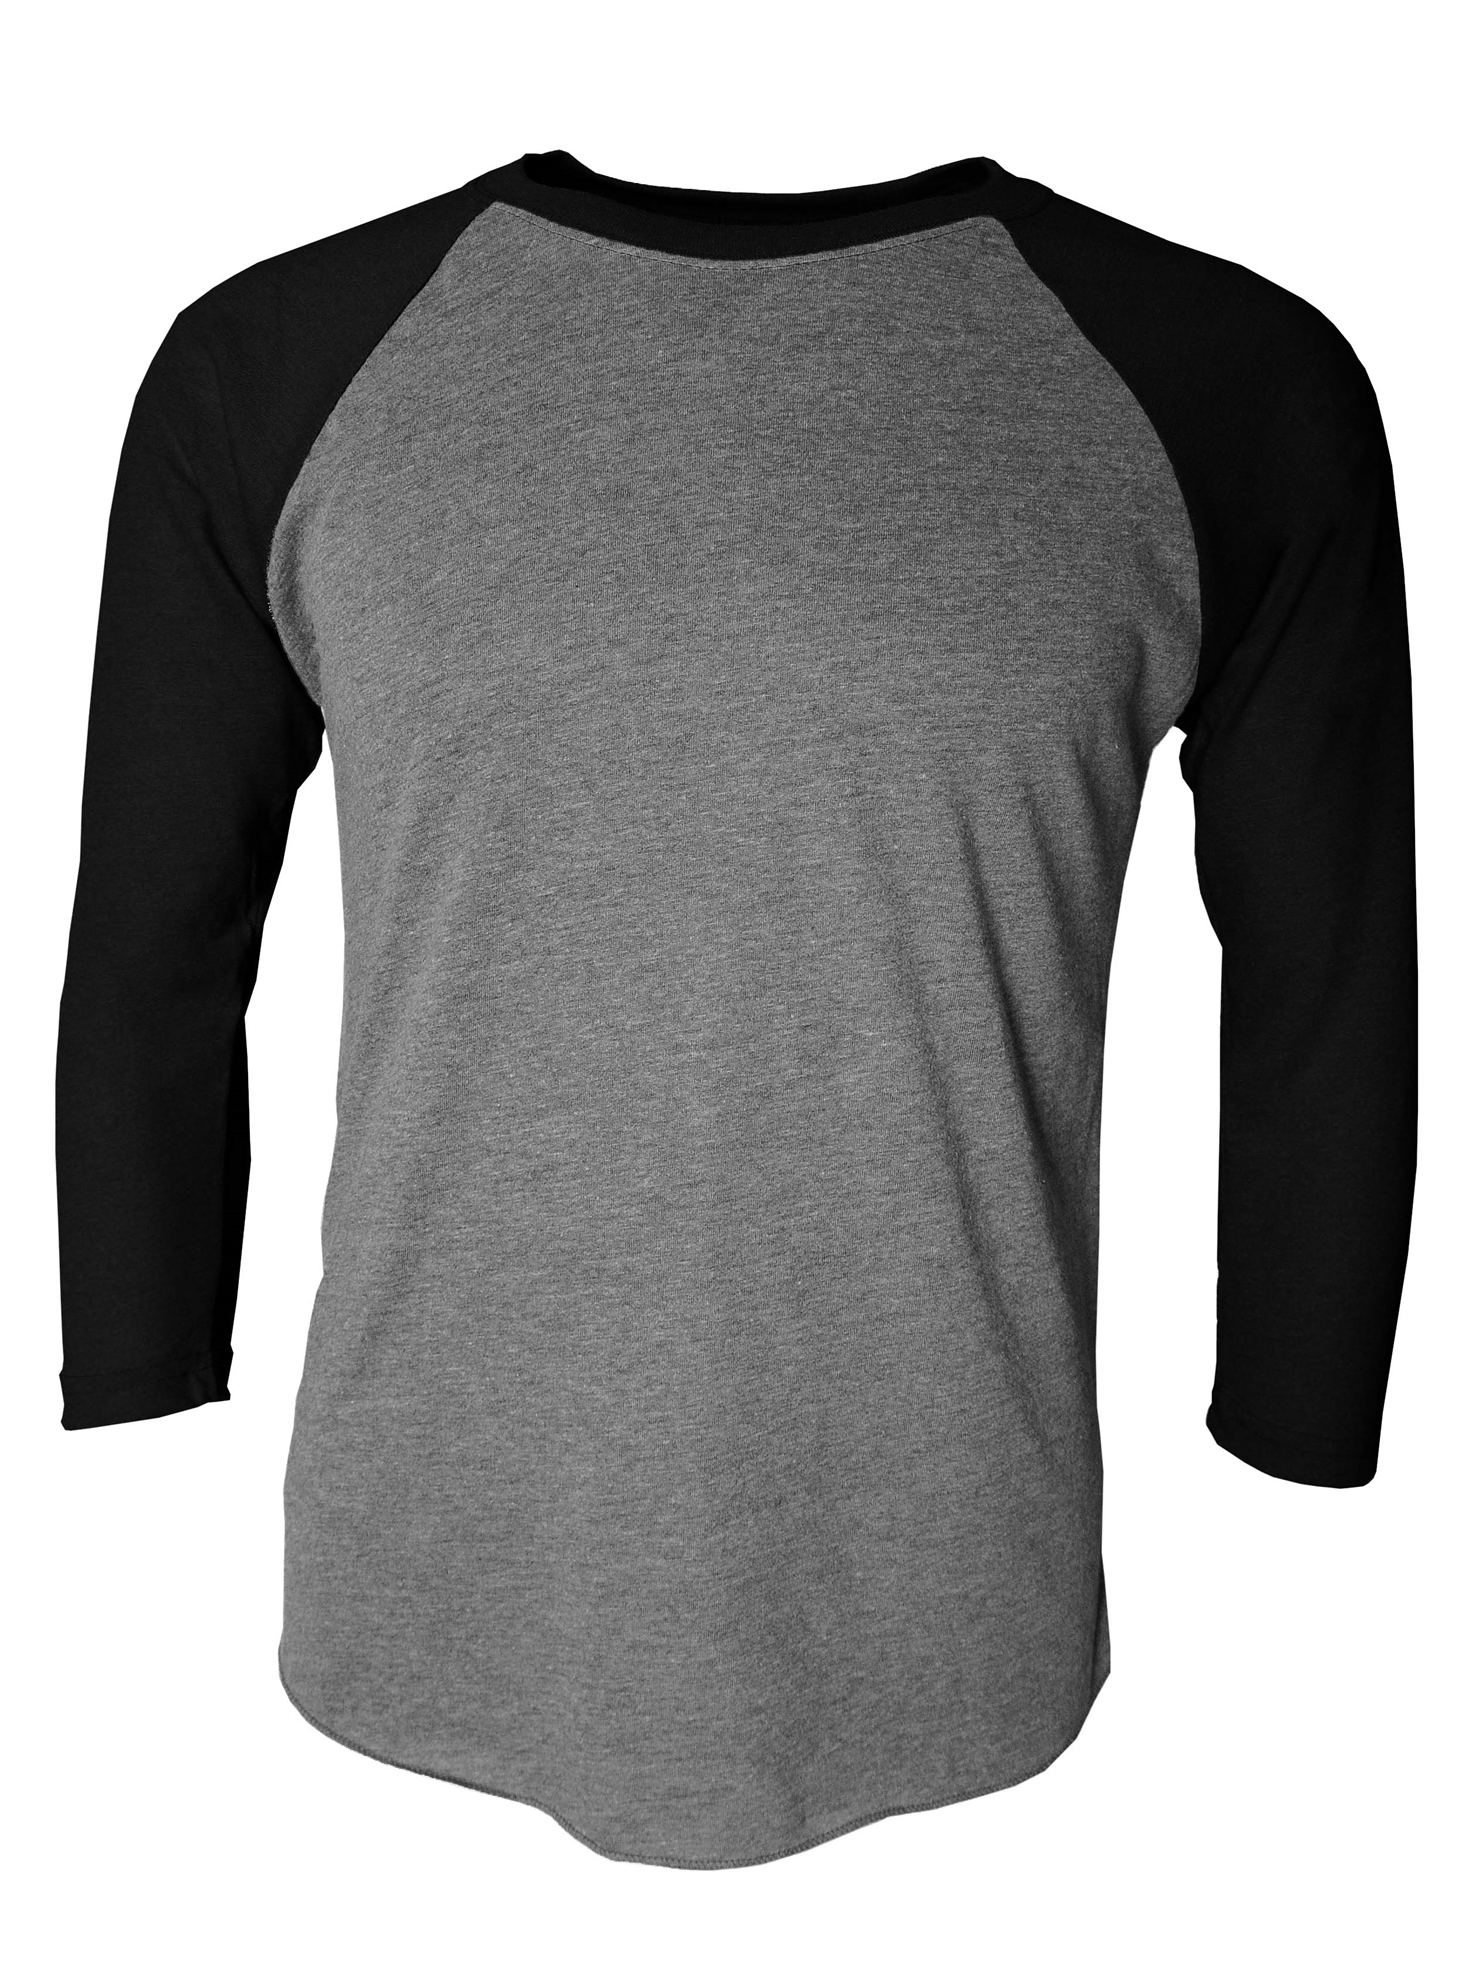 click to view SPORTS GREY/BLACK